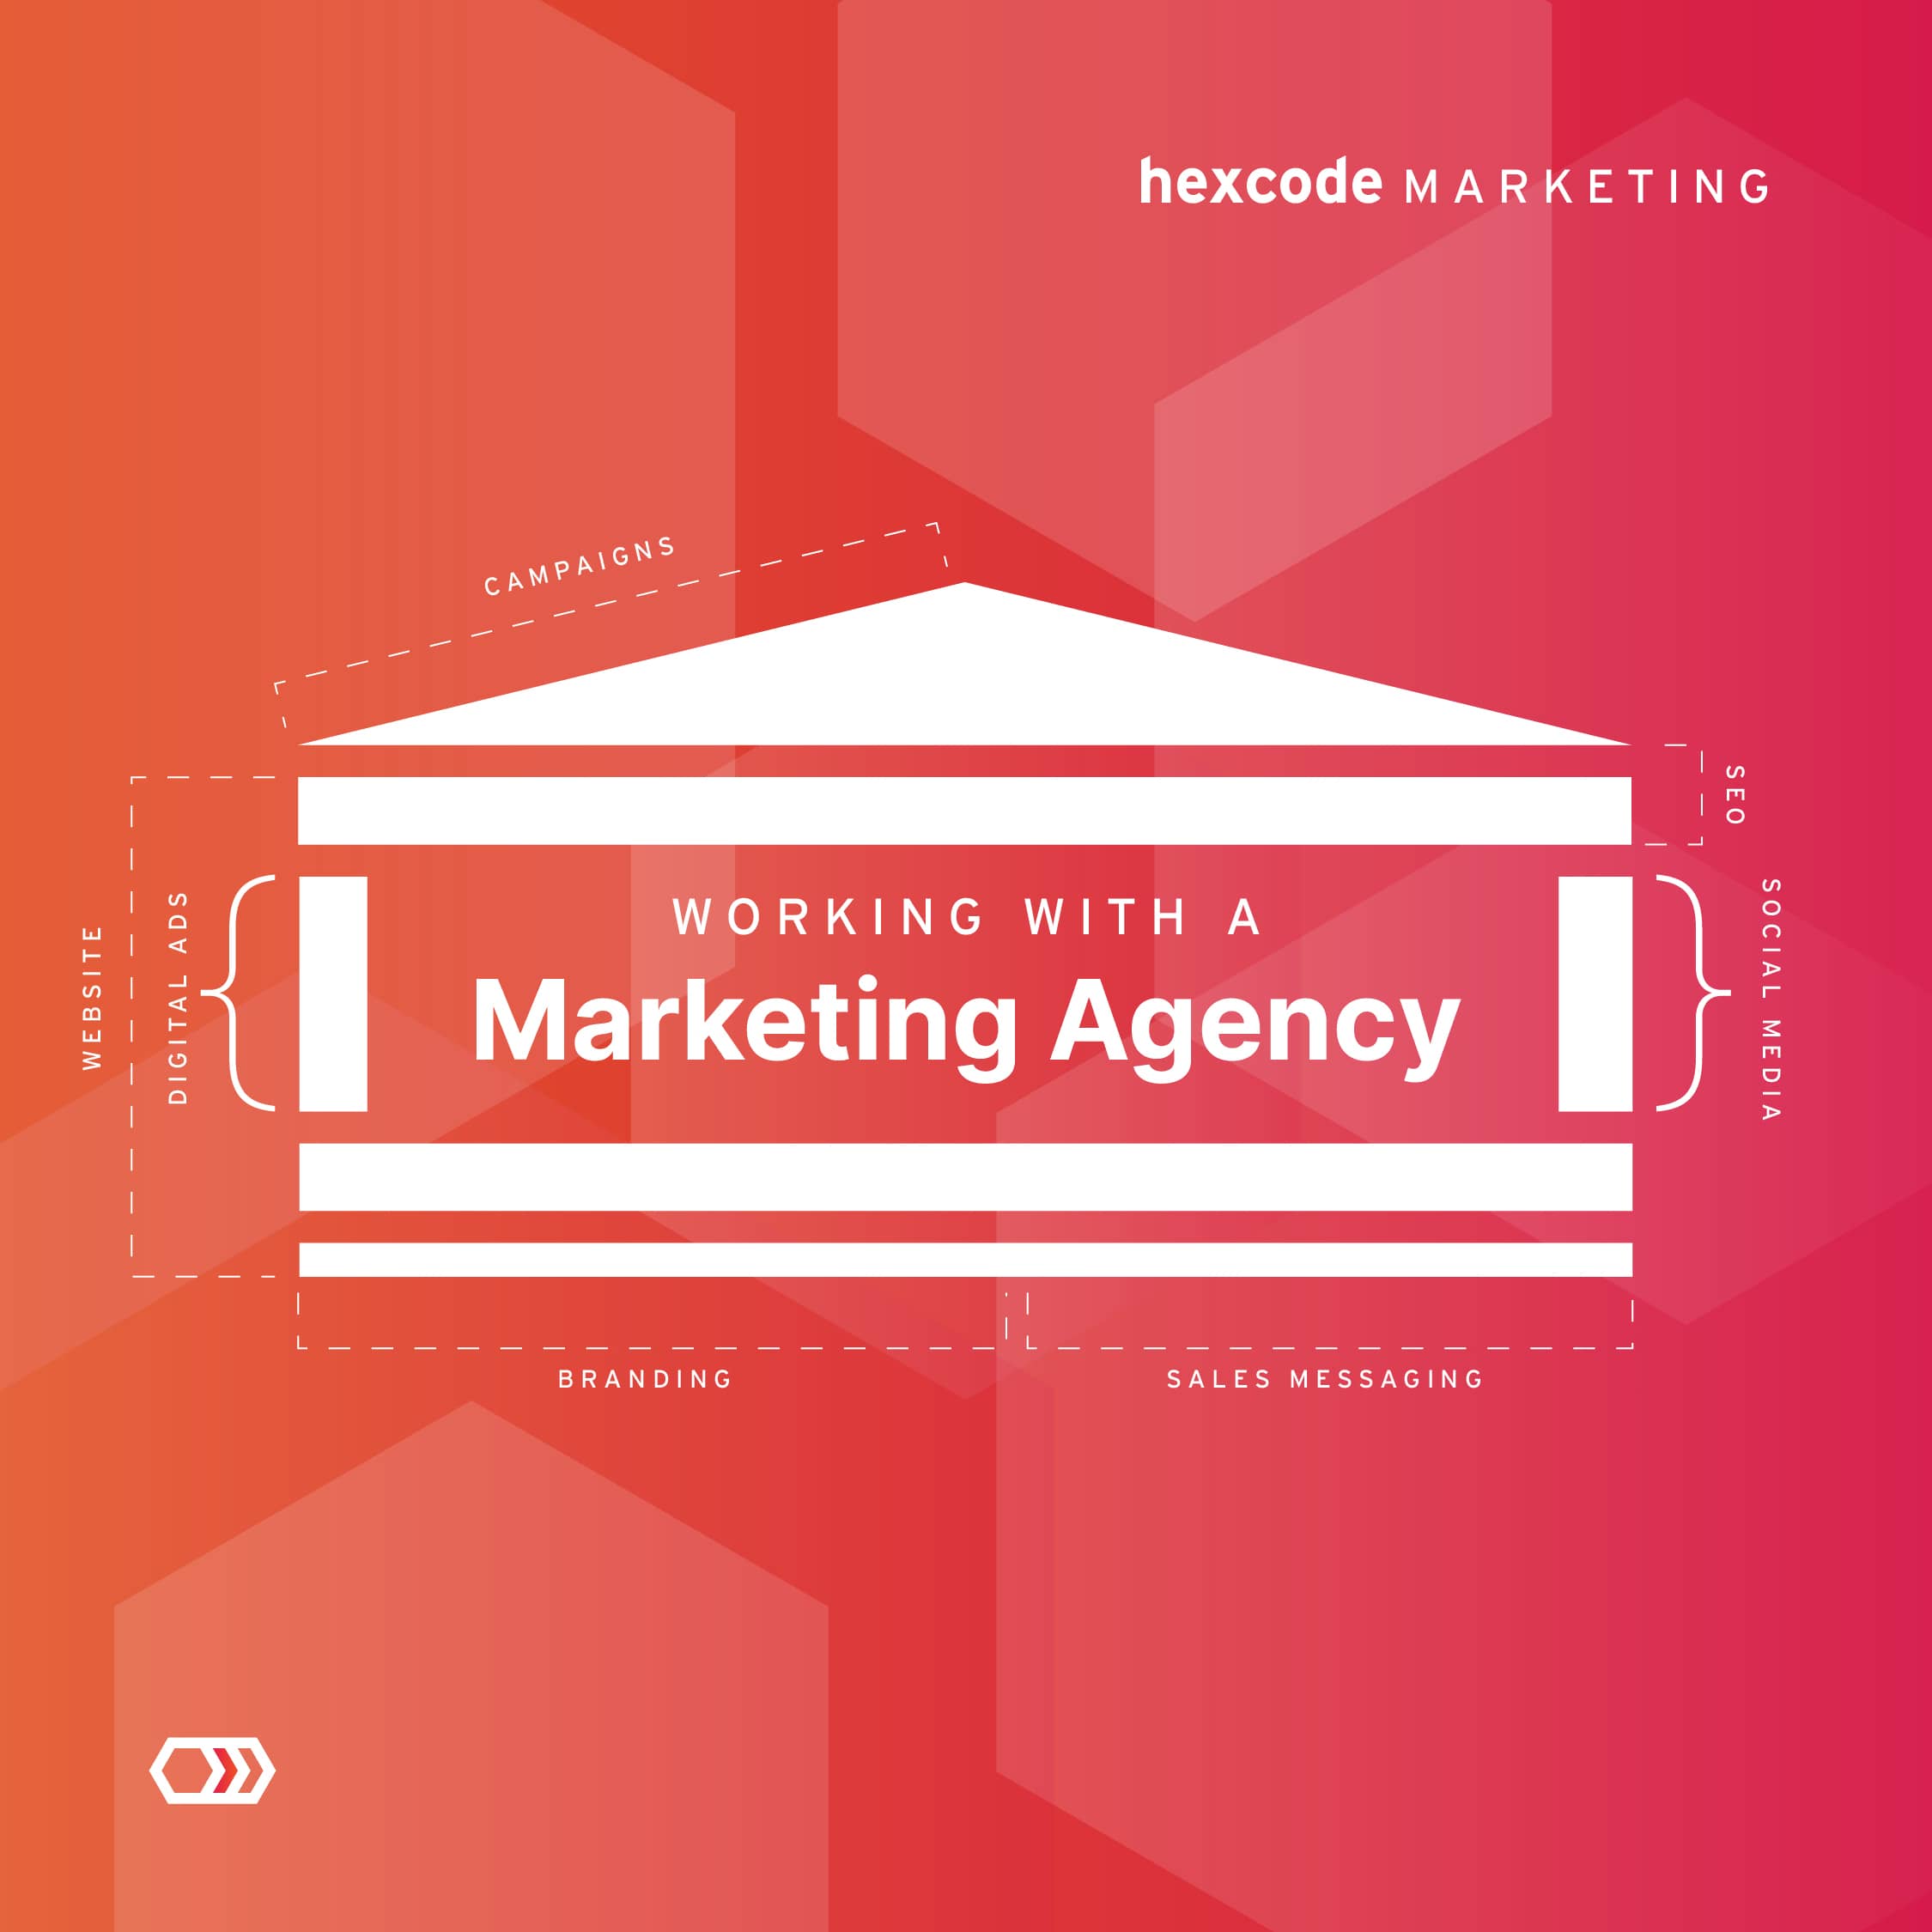 Working With a Marketing Agency